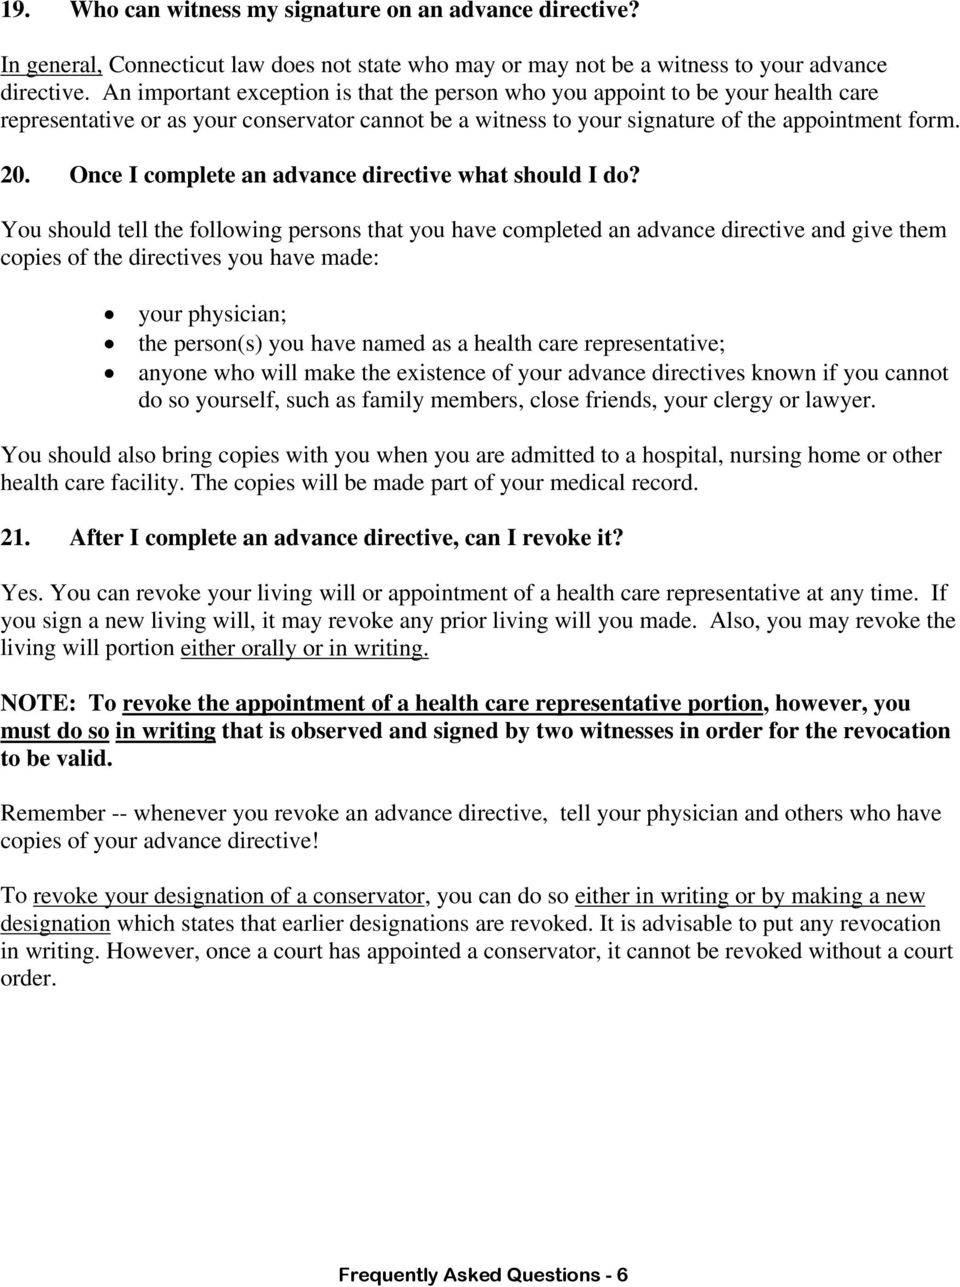 Once I complete an advance directive what should I do?